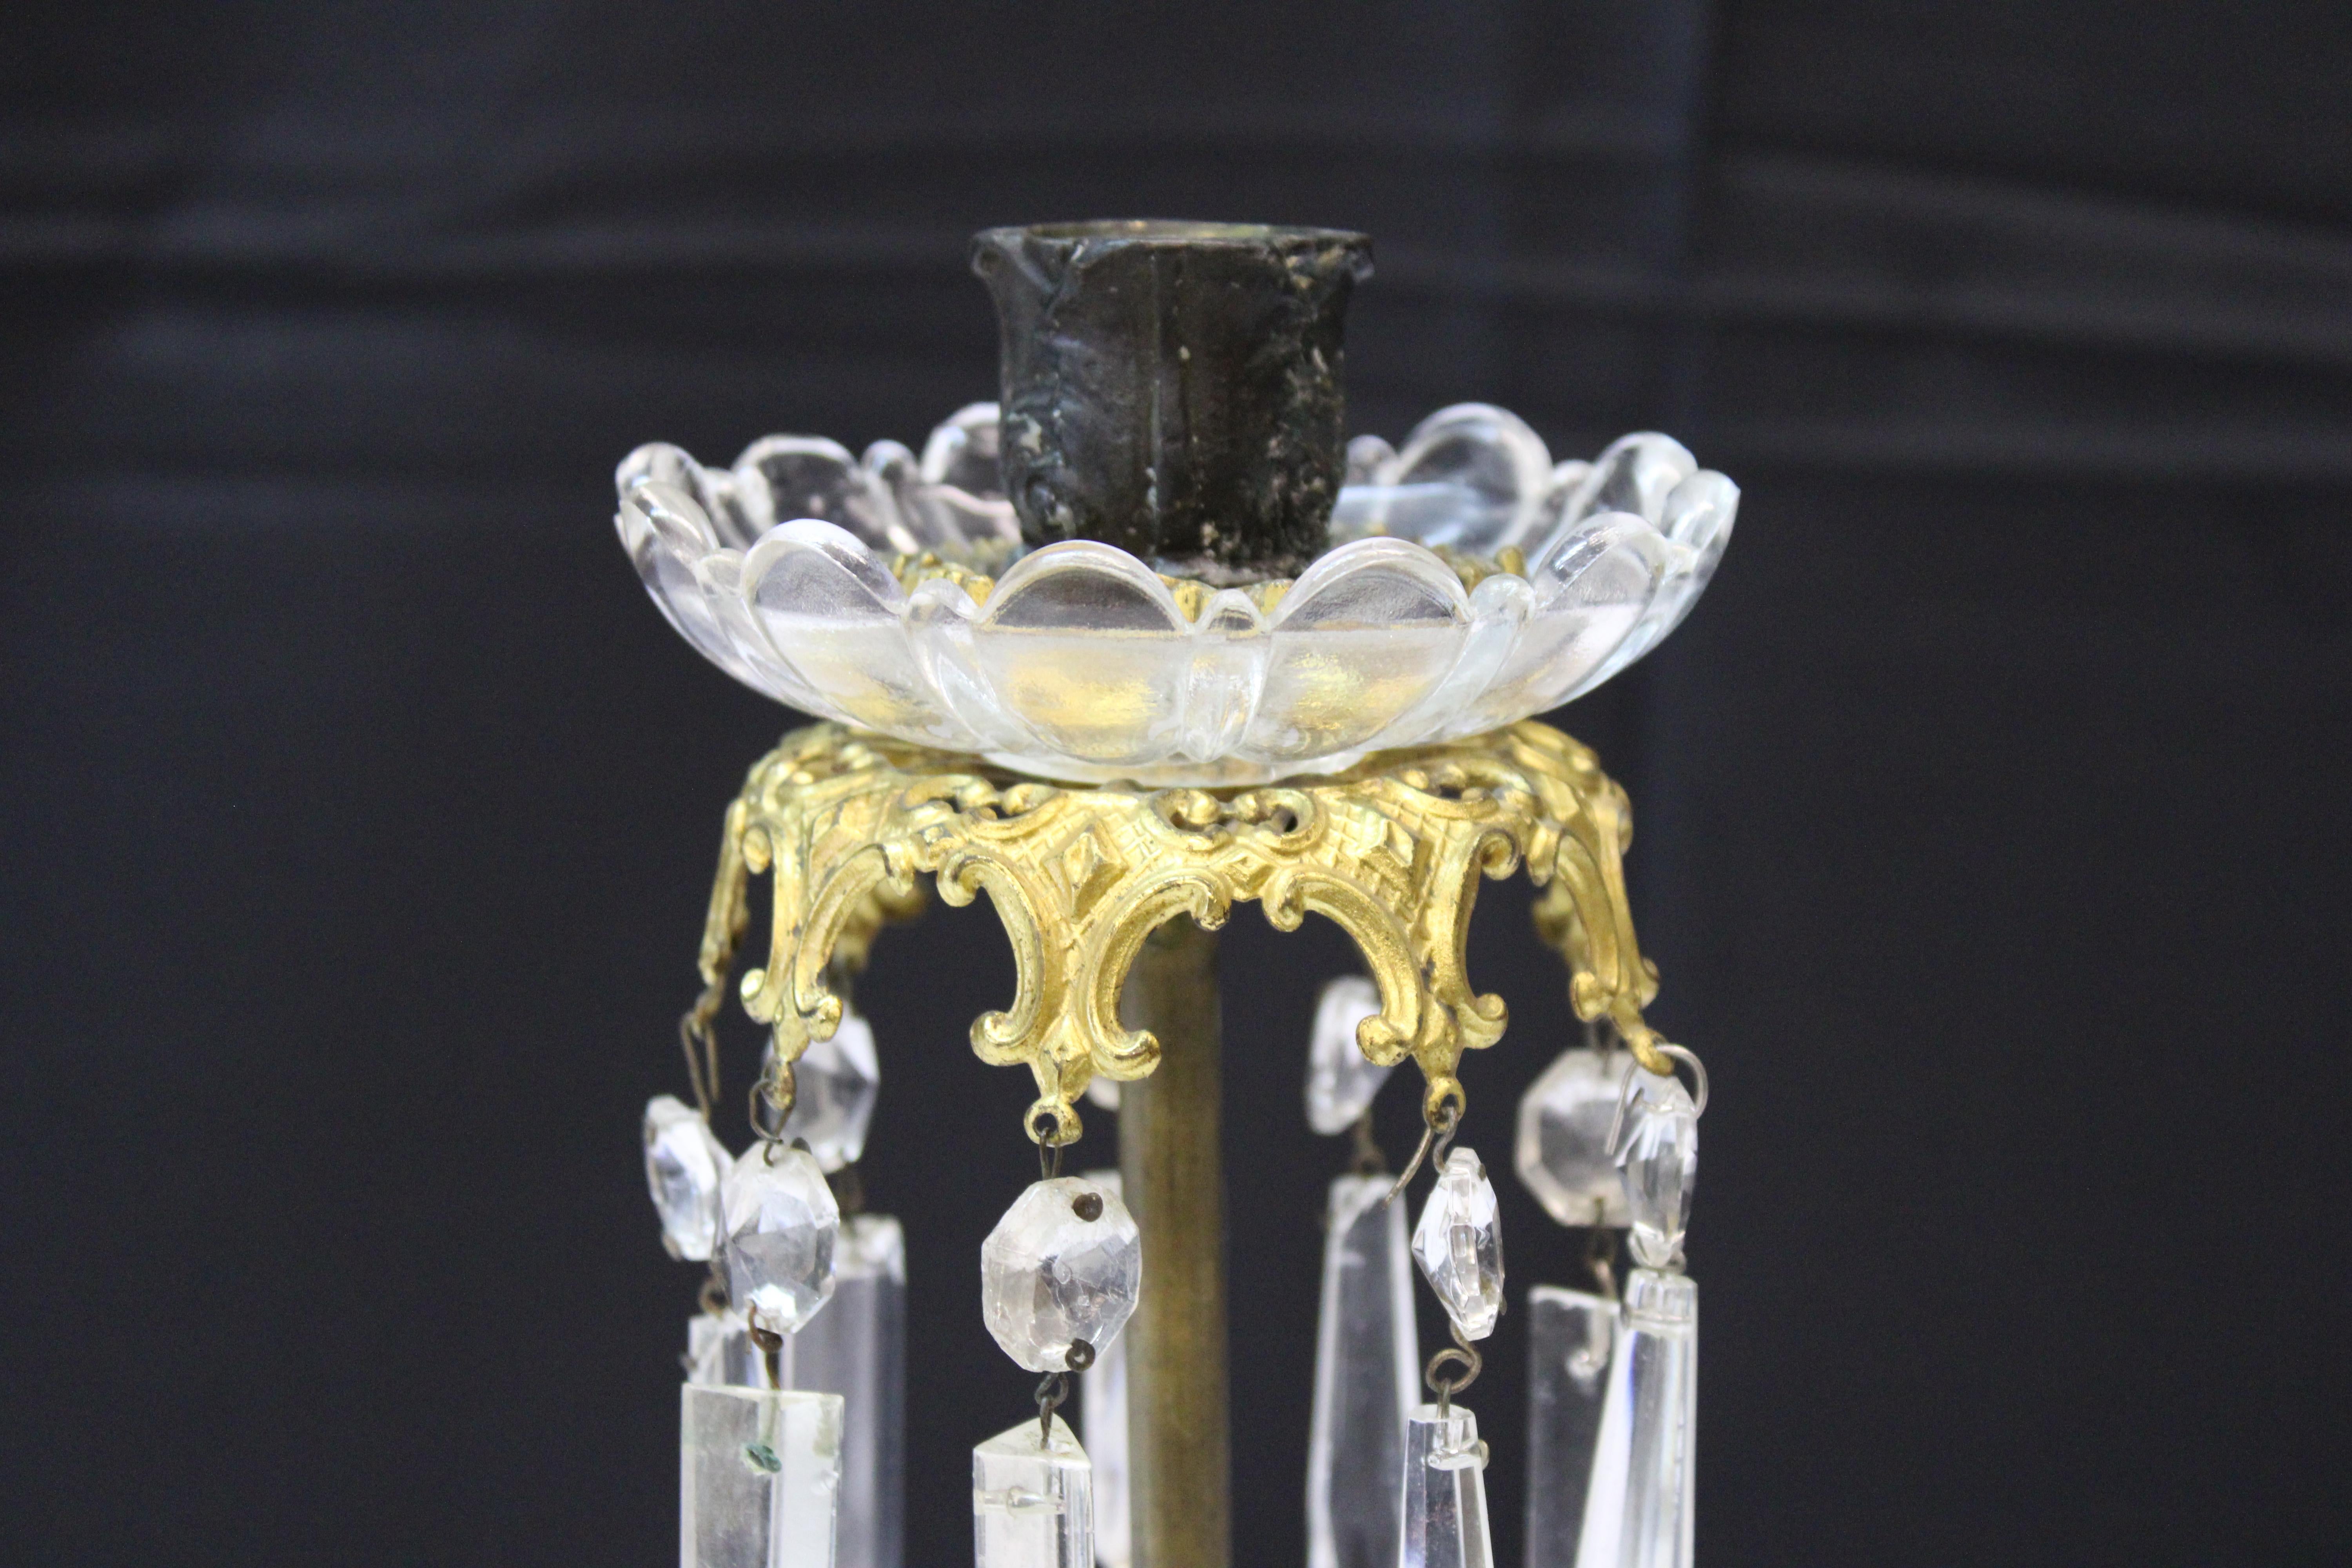 Pr Victorian glass & crystal metal candleholders with gilded giraffes.